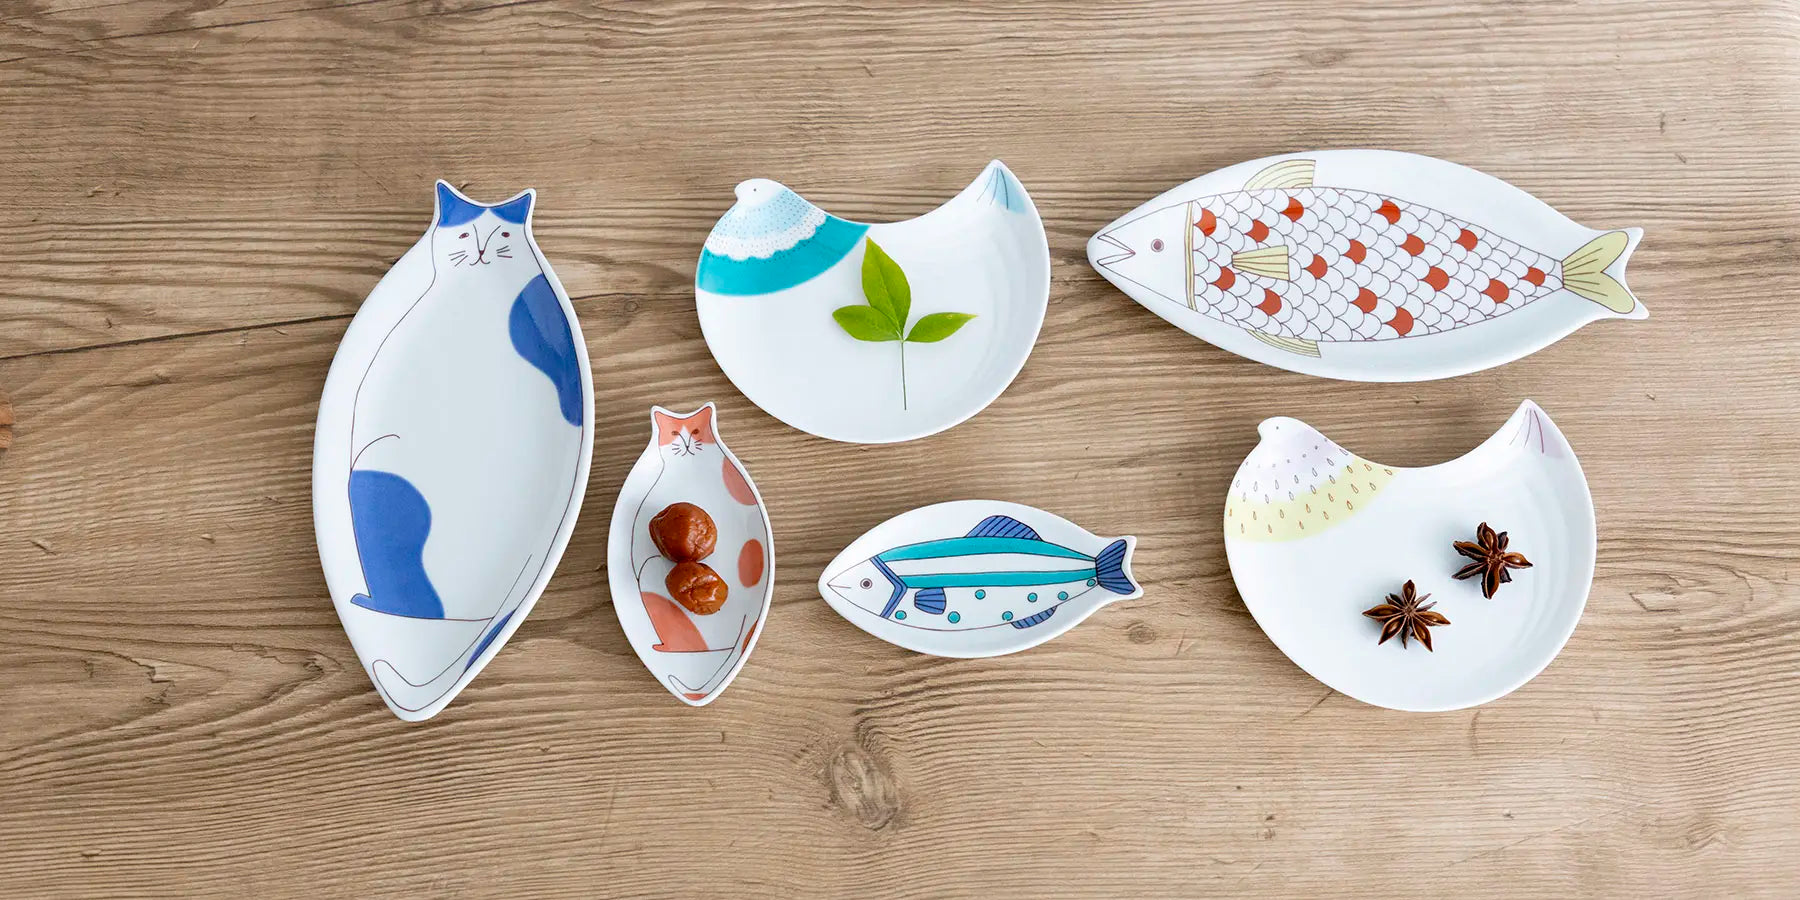 Discover products by HAREKUTANI on Globalkitchen Japan.